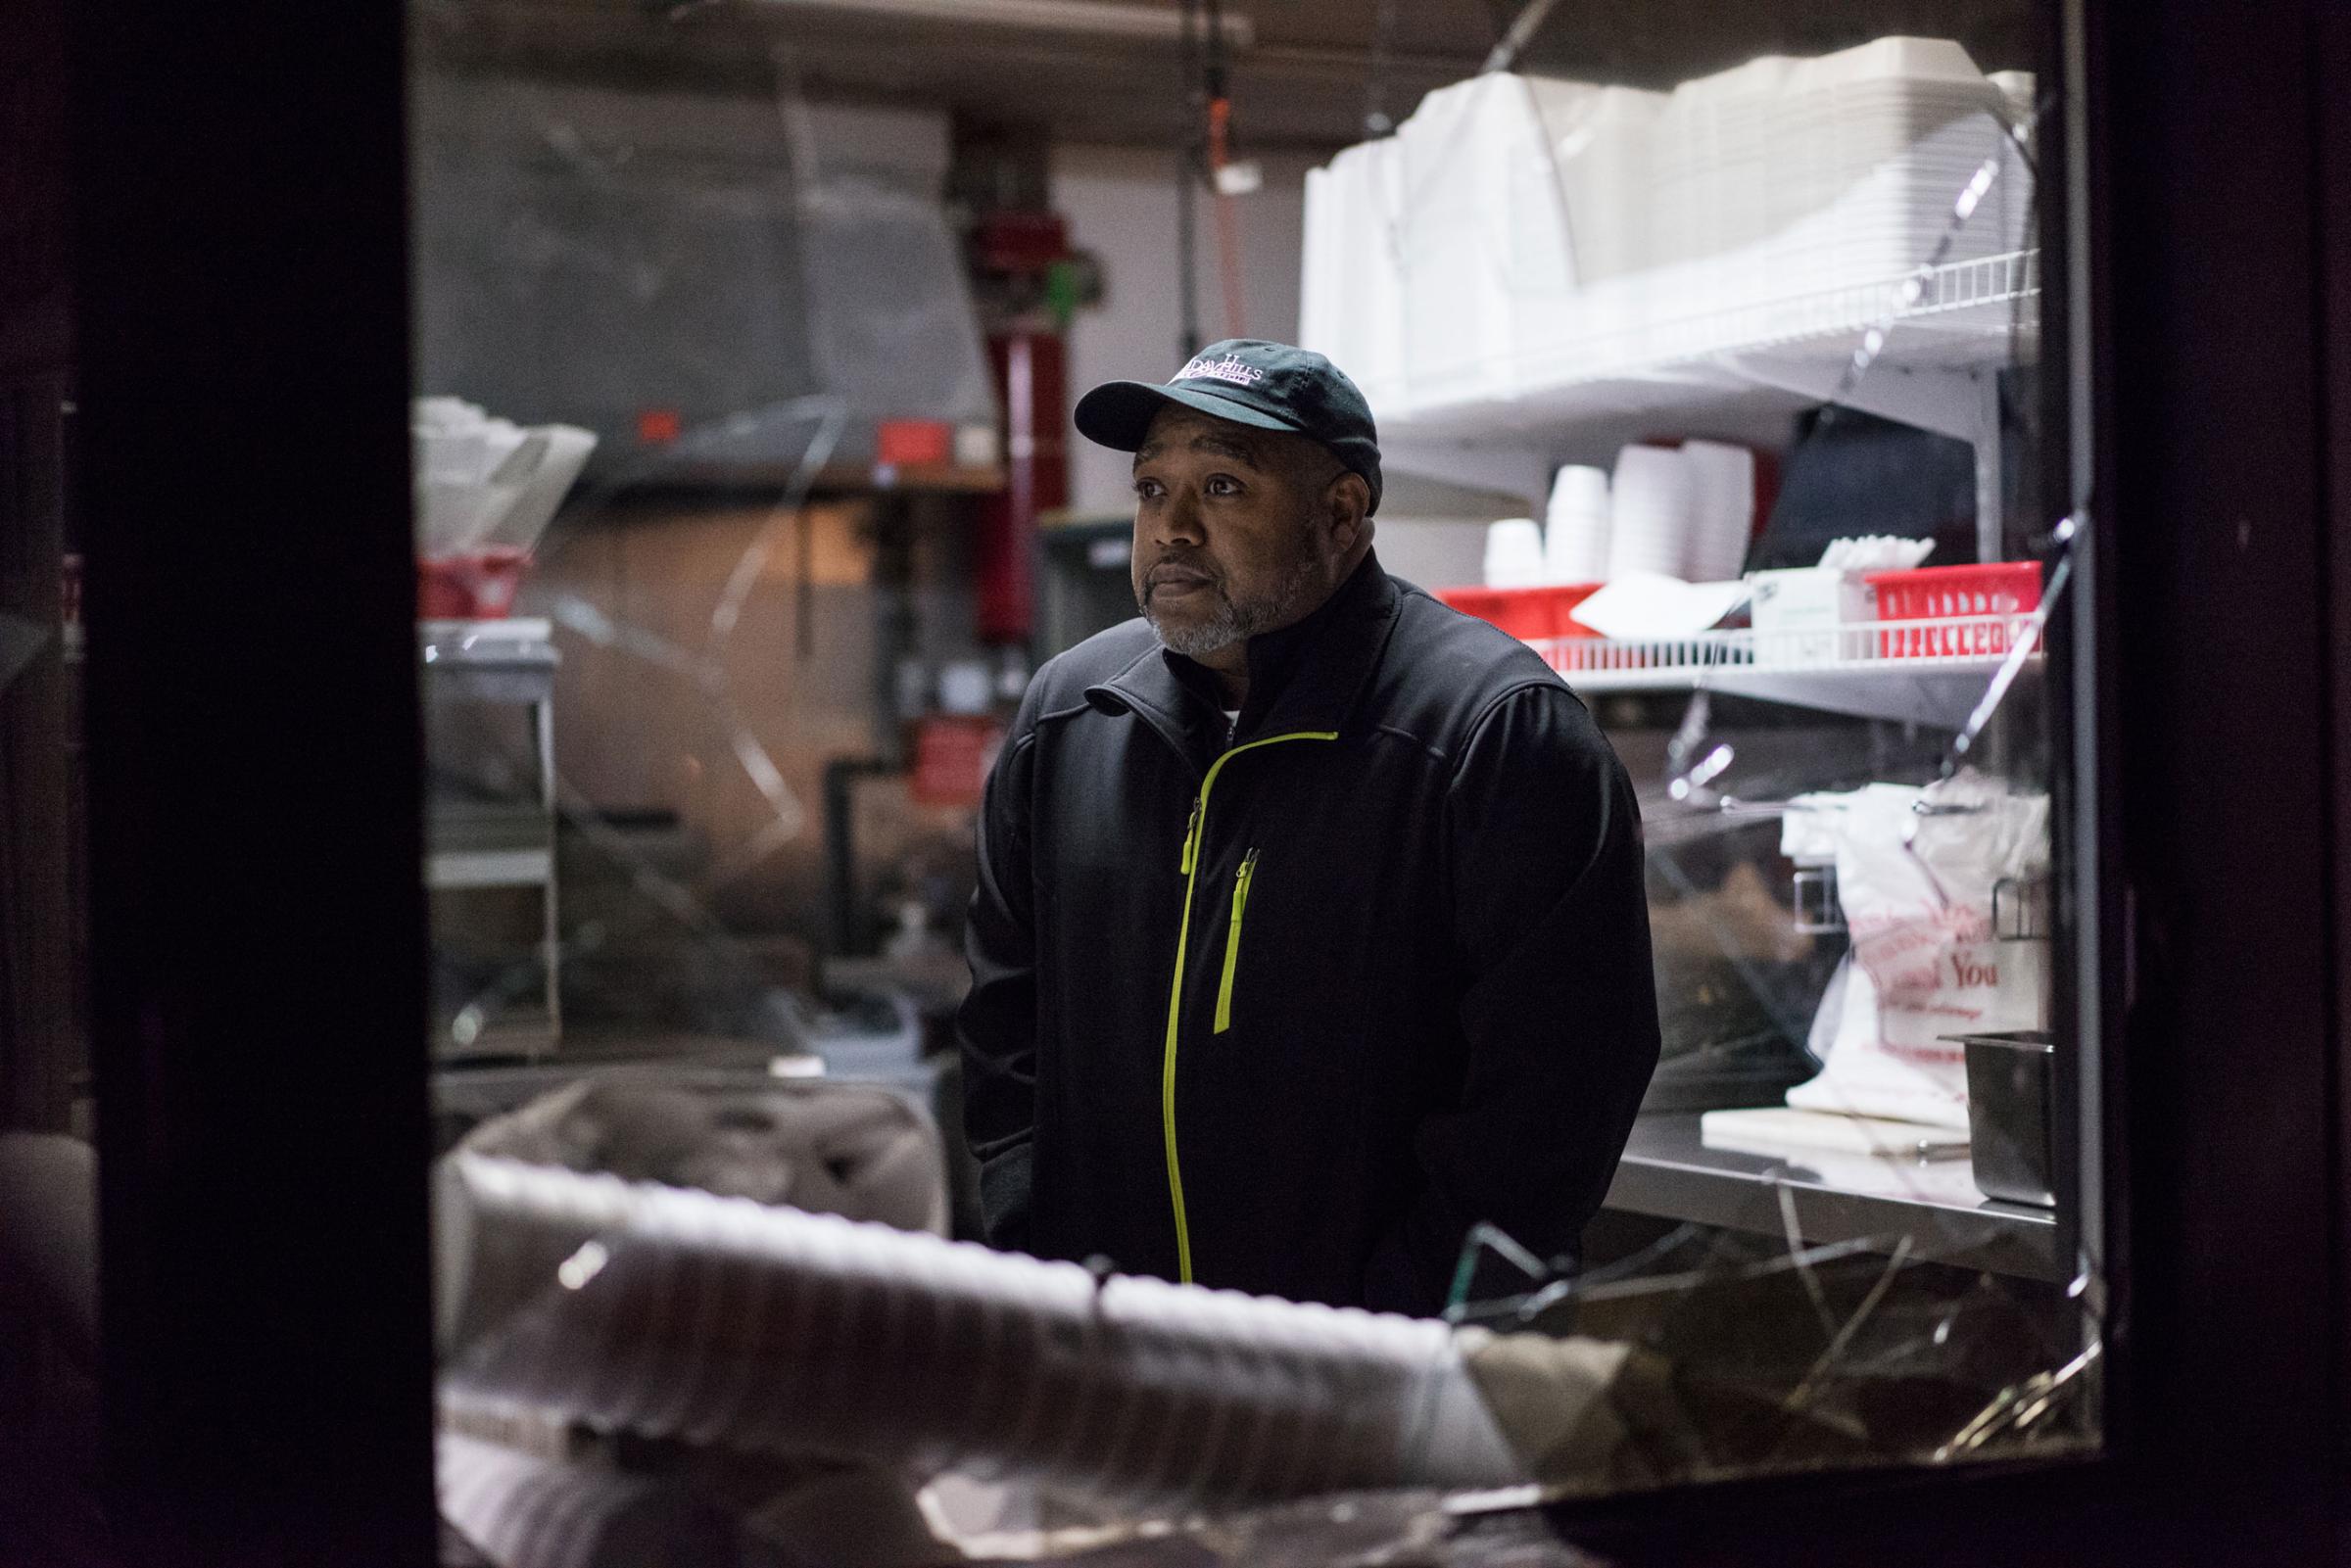 Patrick London surveys the damage at his fast food restaurant London's Wing House after it was looted during protests on November 24, 2014.